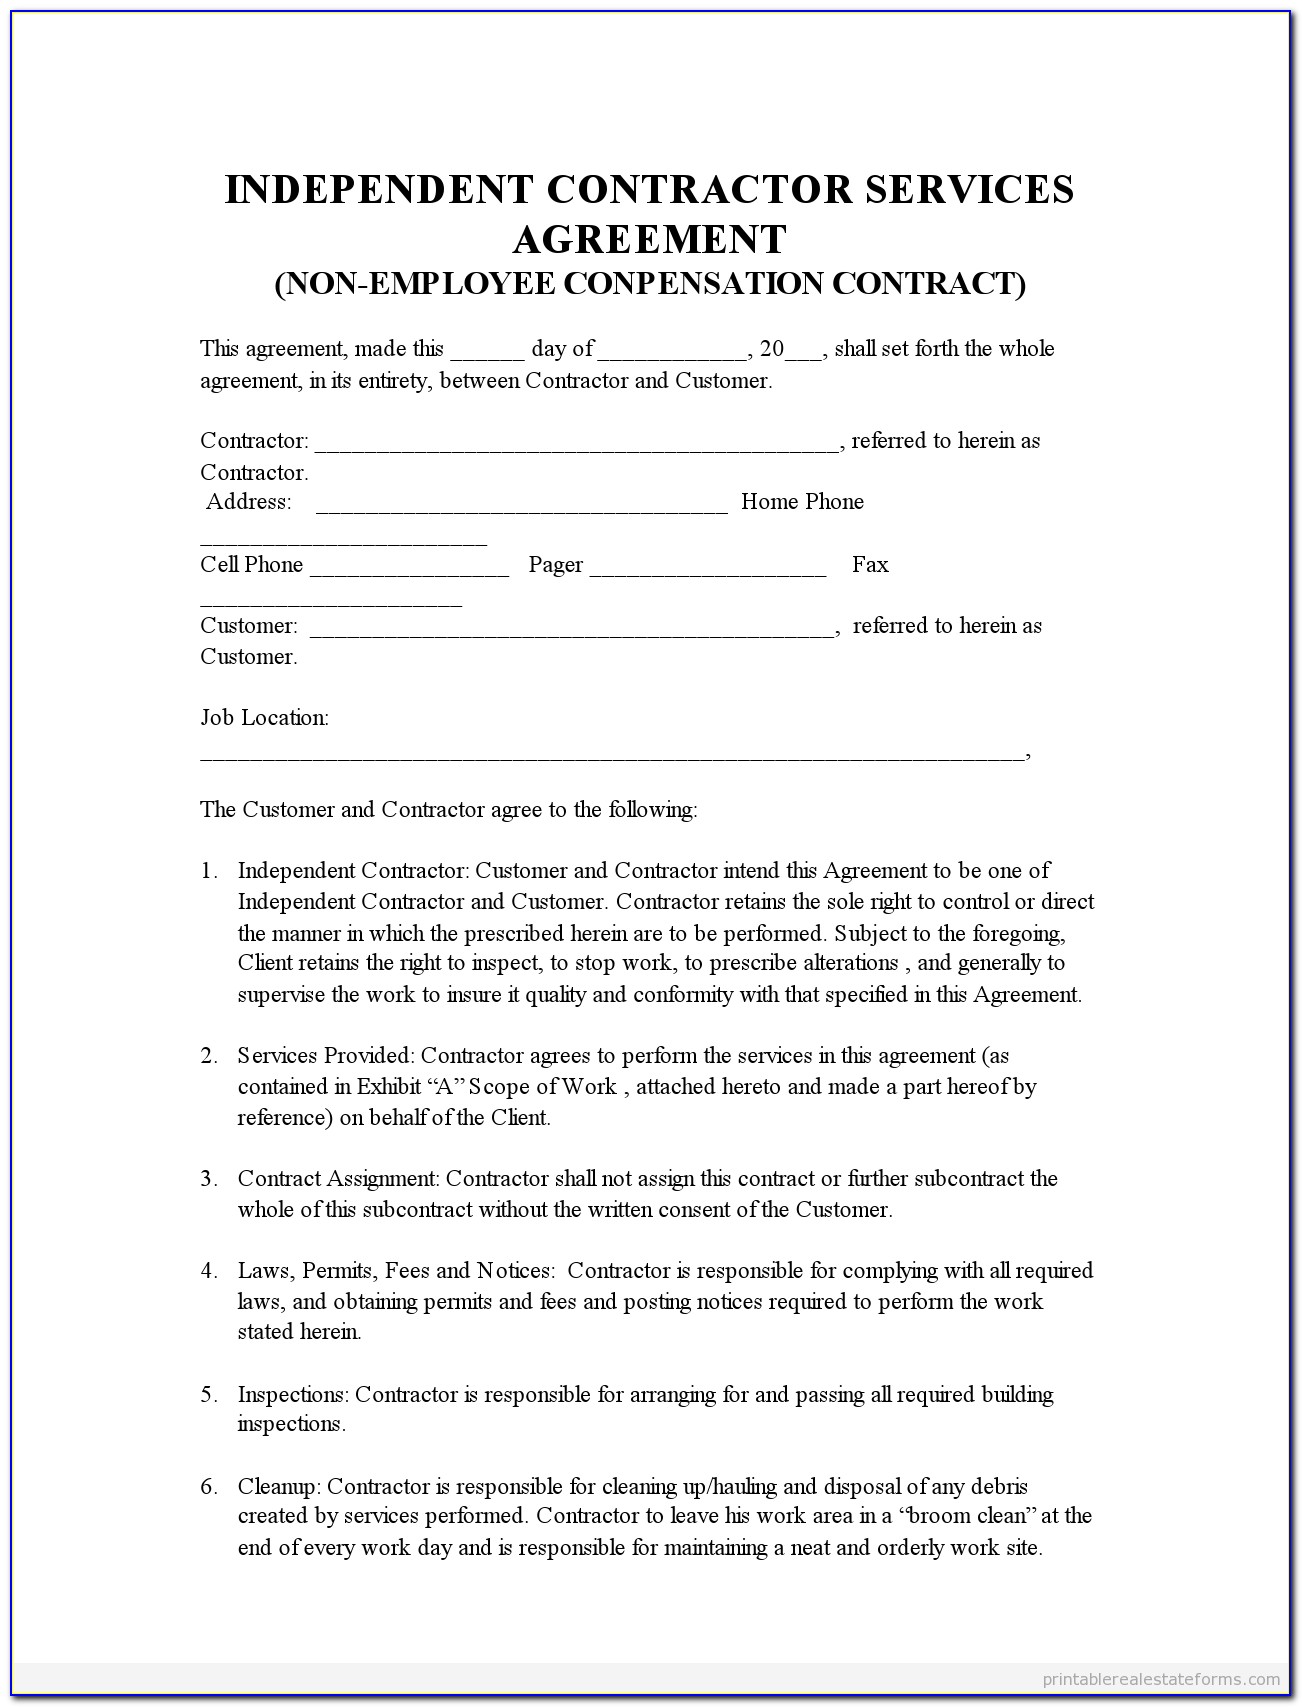 Independent Contractor Agreement Sample California